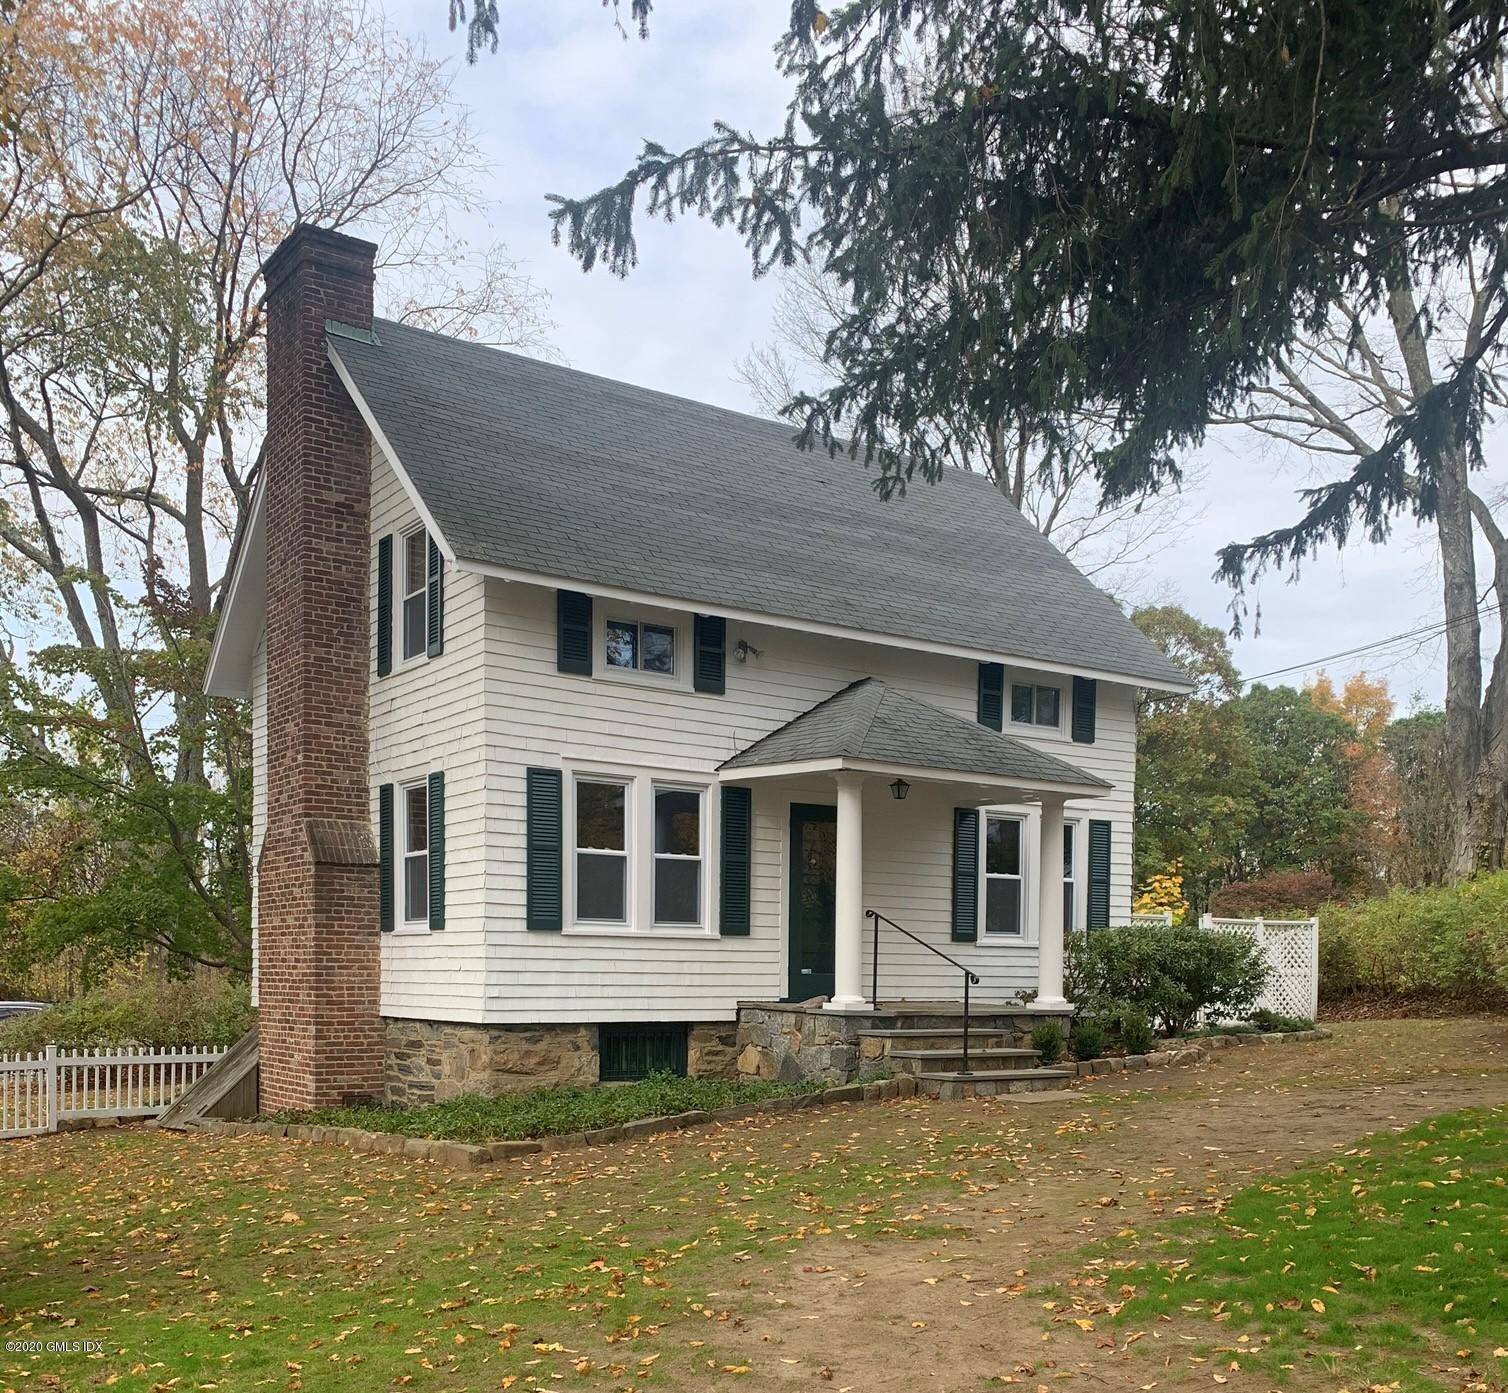 Situated on a stunning 7 acre property, which was formerly an apple orchard, is this charming carriage house, which is totally separate from the main house.